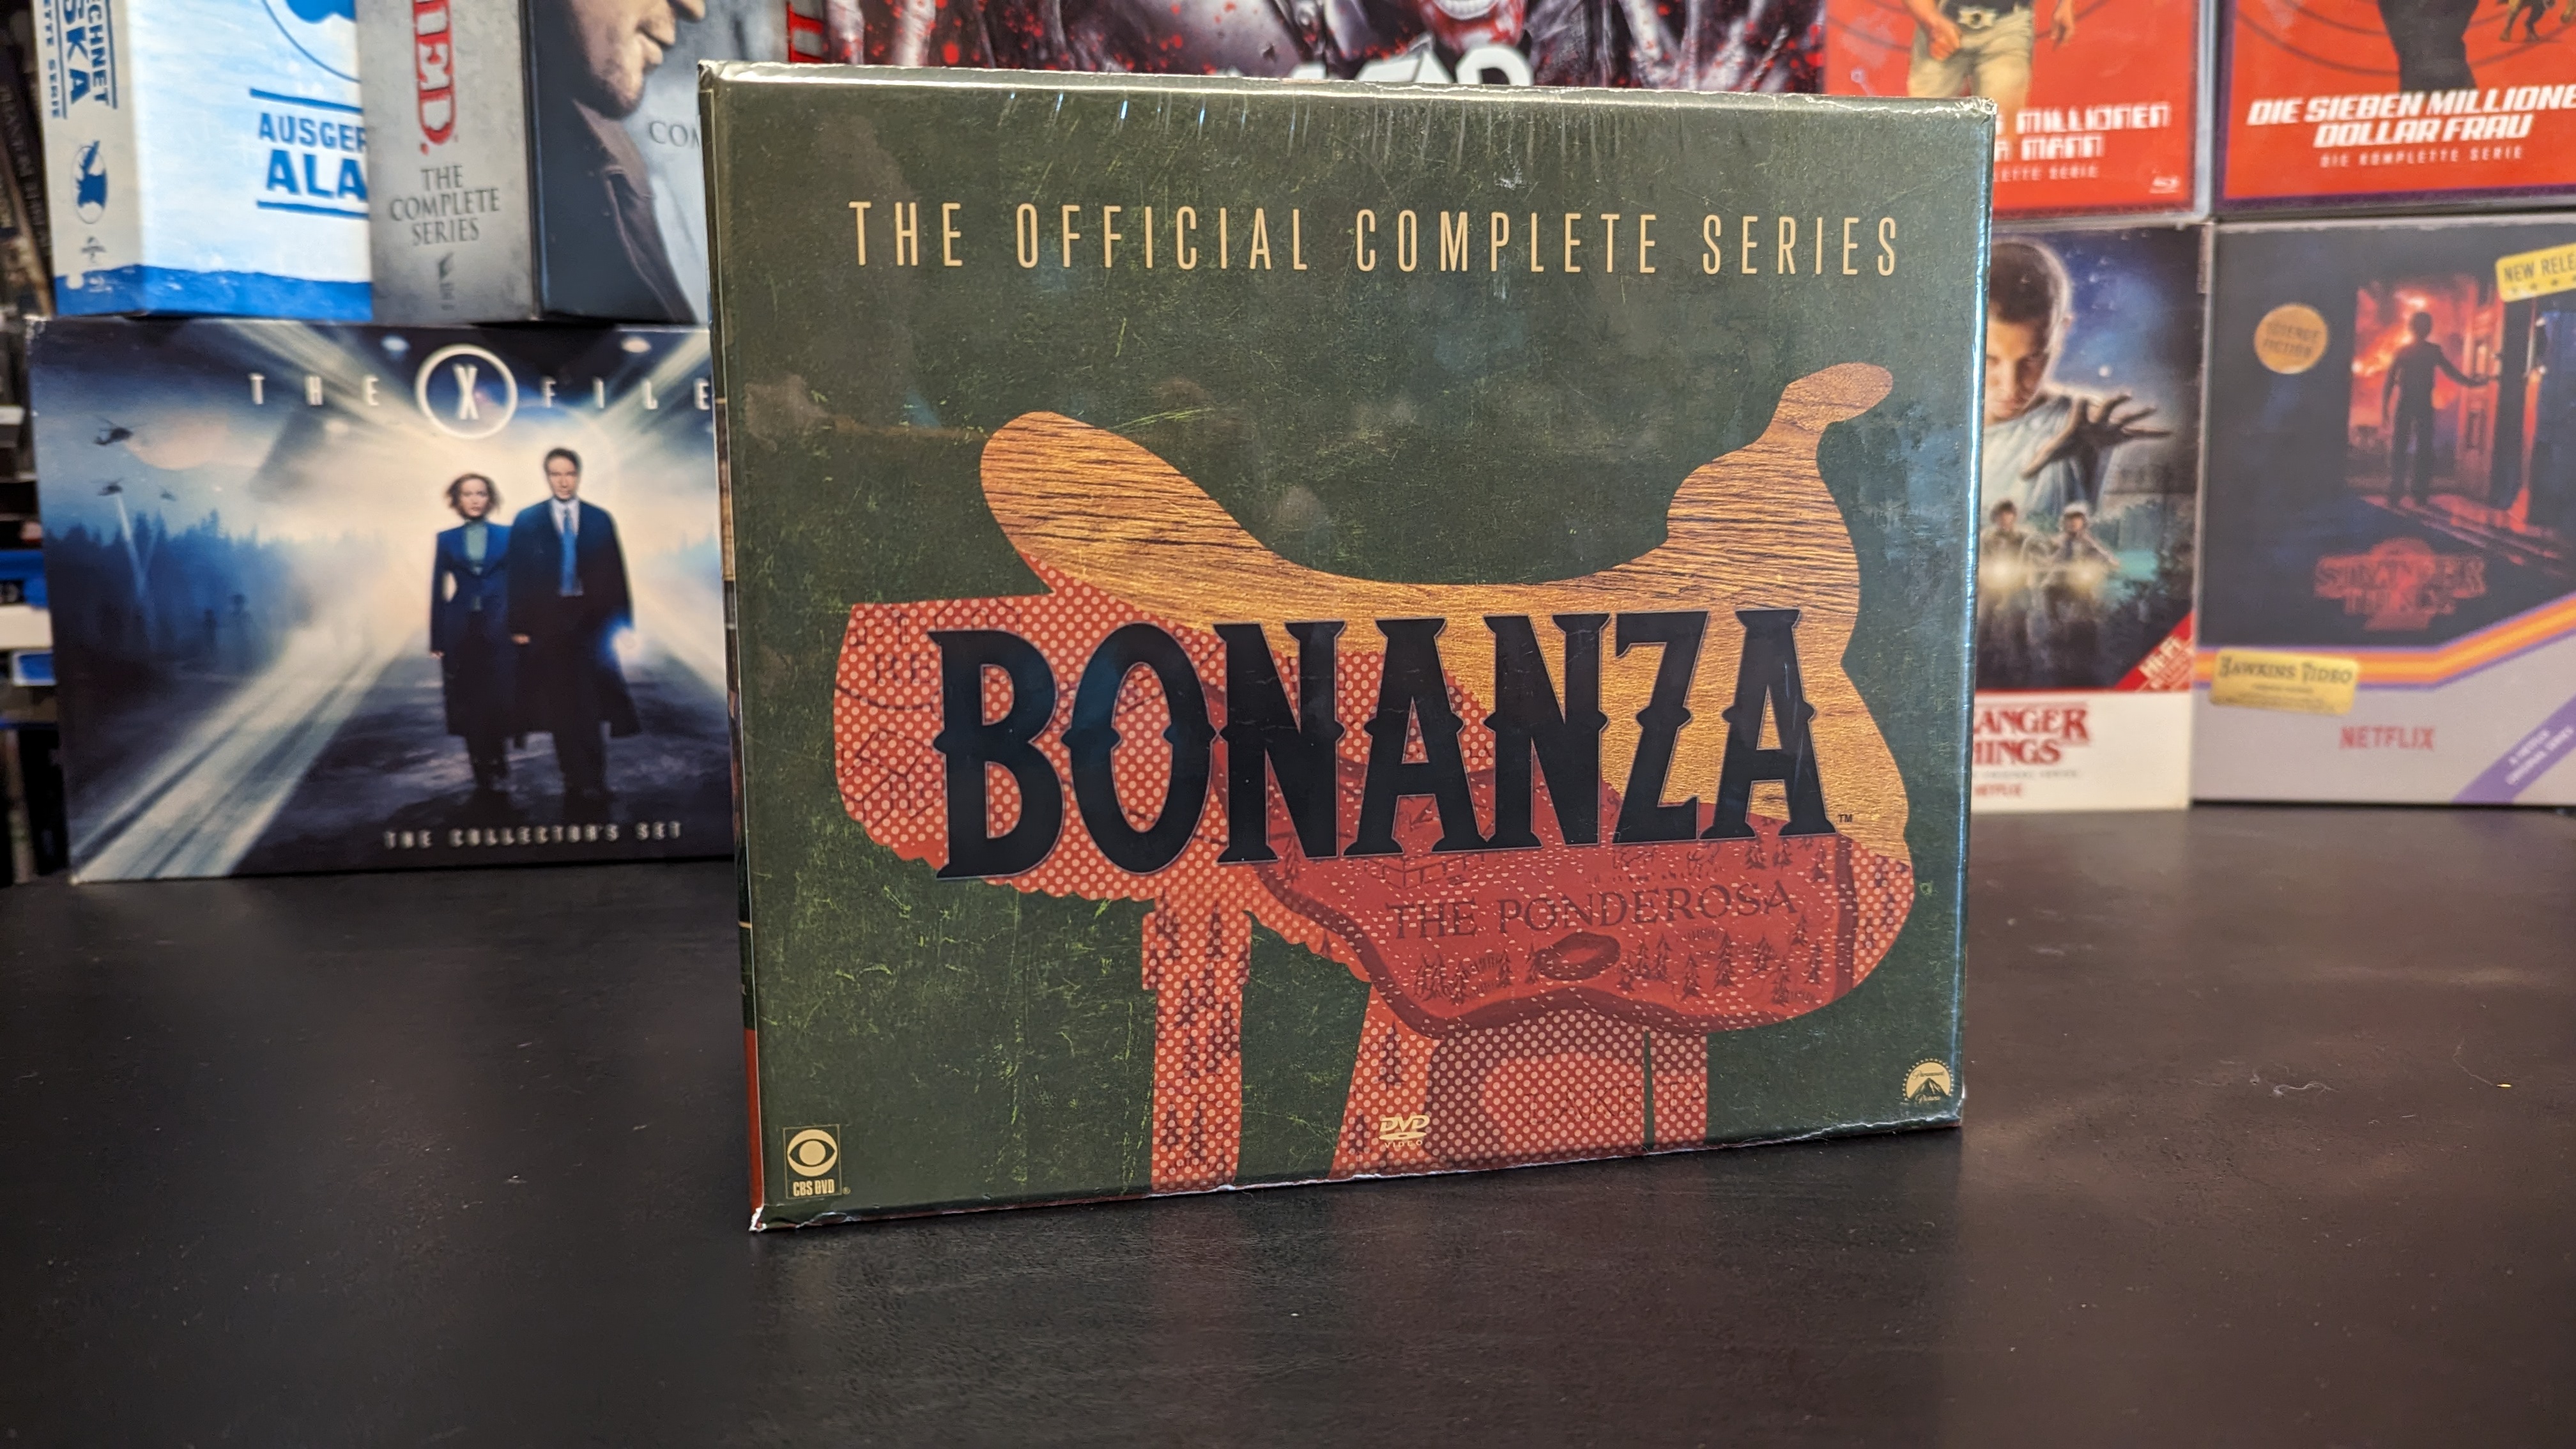 Bonanza: The Official Complete Series - Or When DVD Is Still